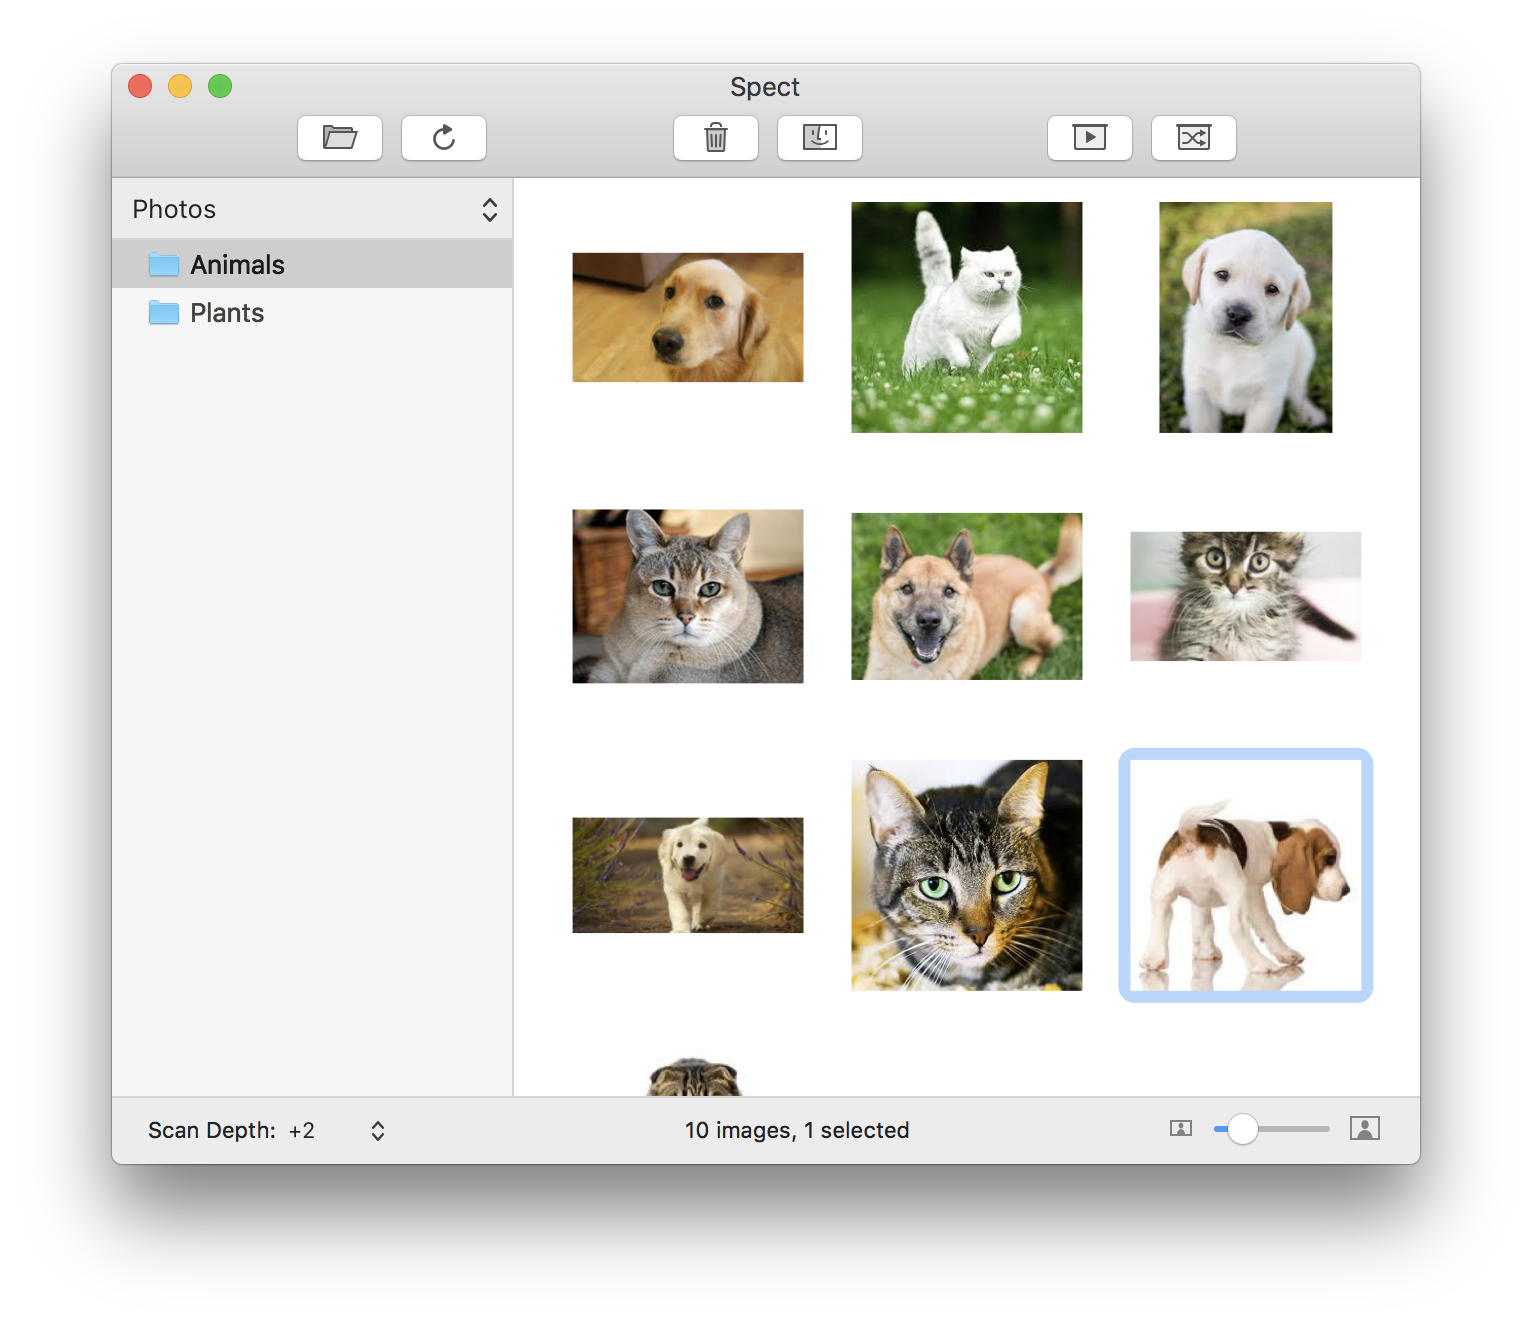 Easily browse all the images on your Mac with the Spect app